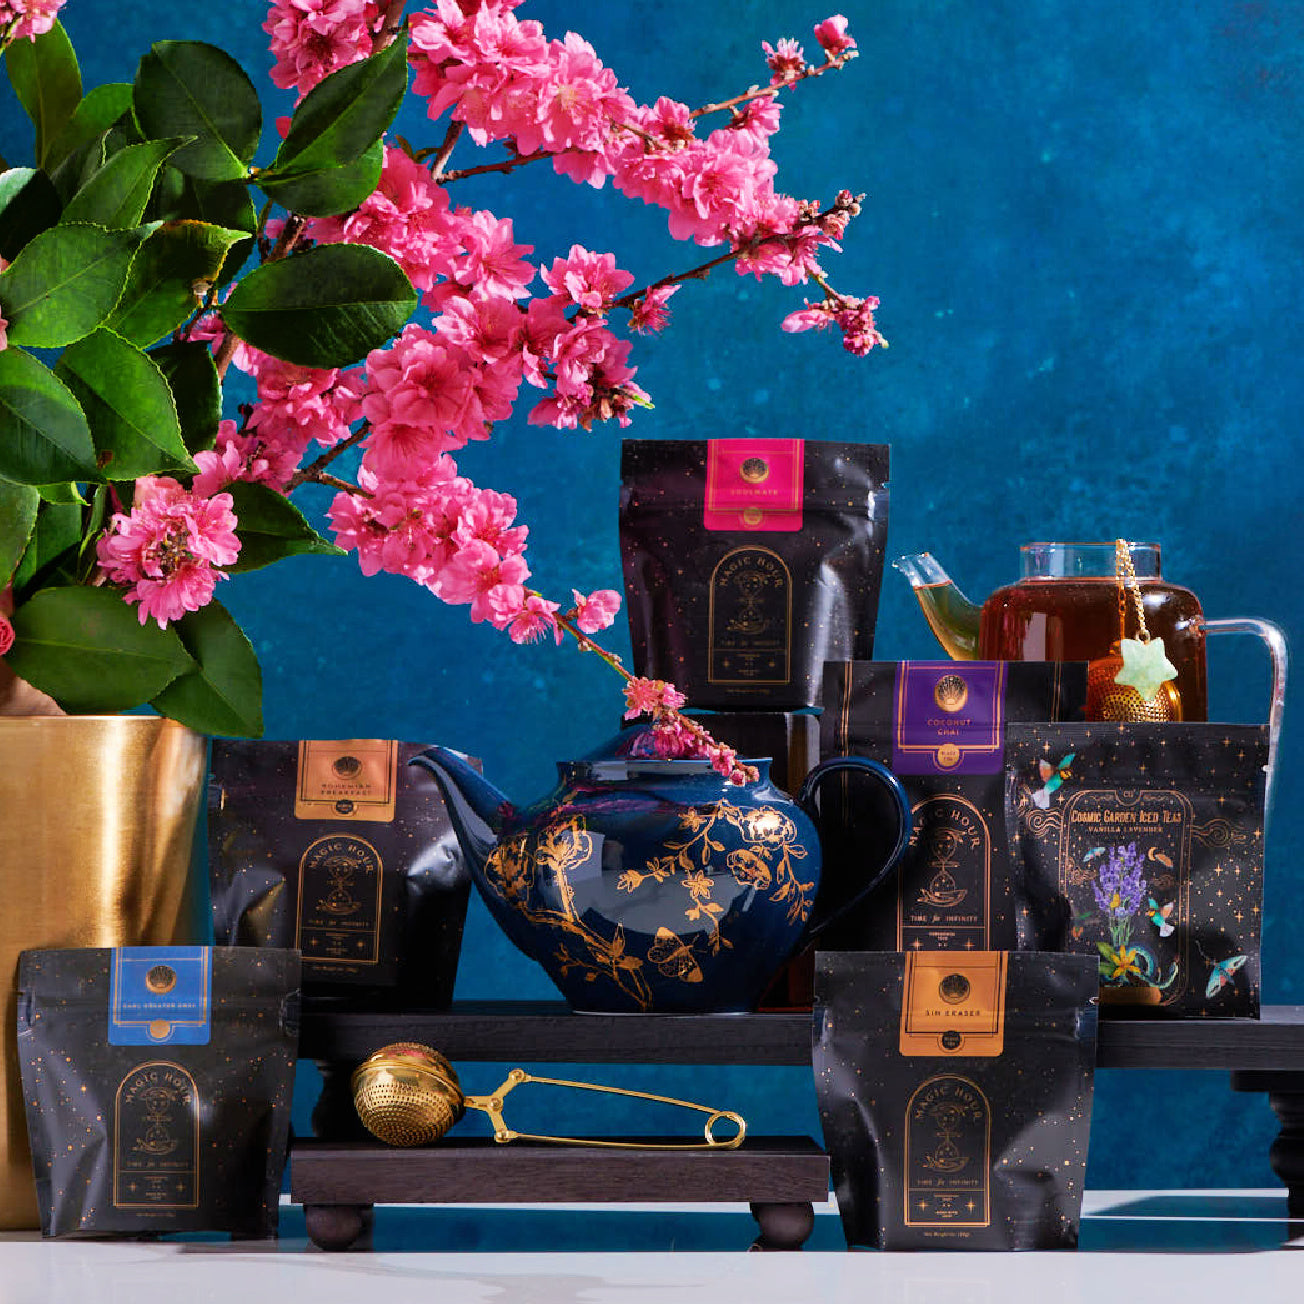 A colorful display features various bags of Magic Hour's Black Tea Magic Sampler Box - Bestselling Organic Black Teas for Energy & Vitality on a dark wooden rack, with a dark blue teapot adorned with golden patterns in the center. A gold tea infuser and a glass teapot with organic tea are nearby. Pink cherry blossoms in a pot enhance the vibrant setting.